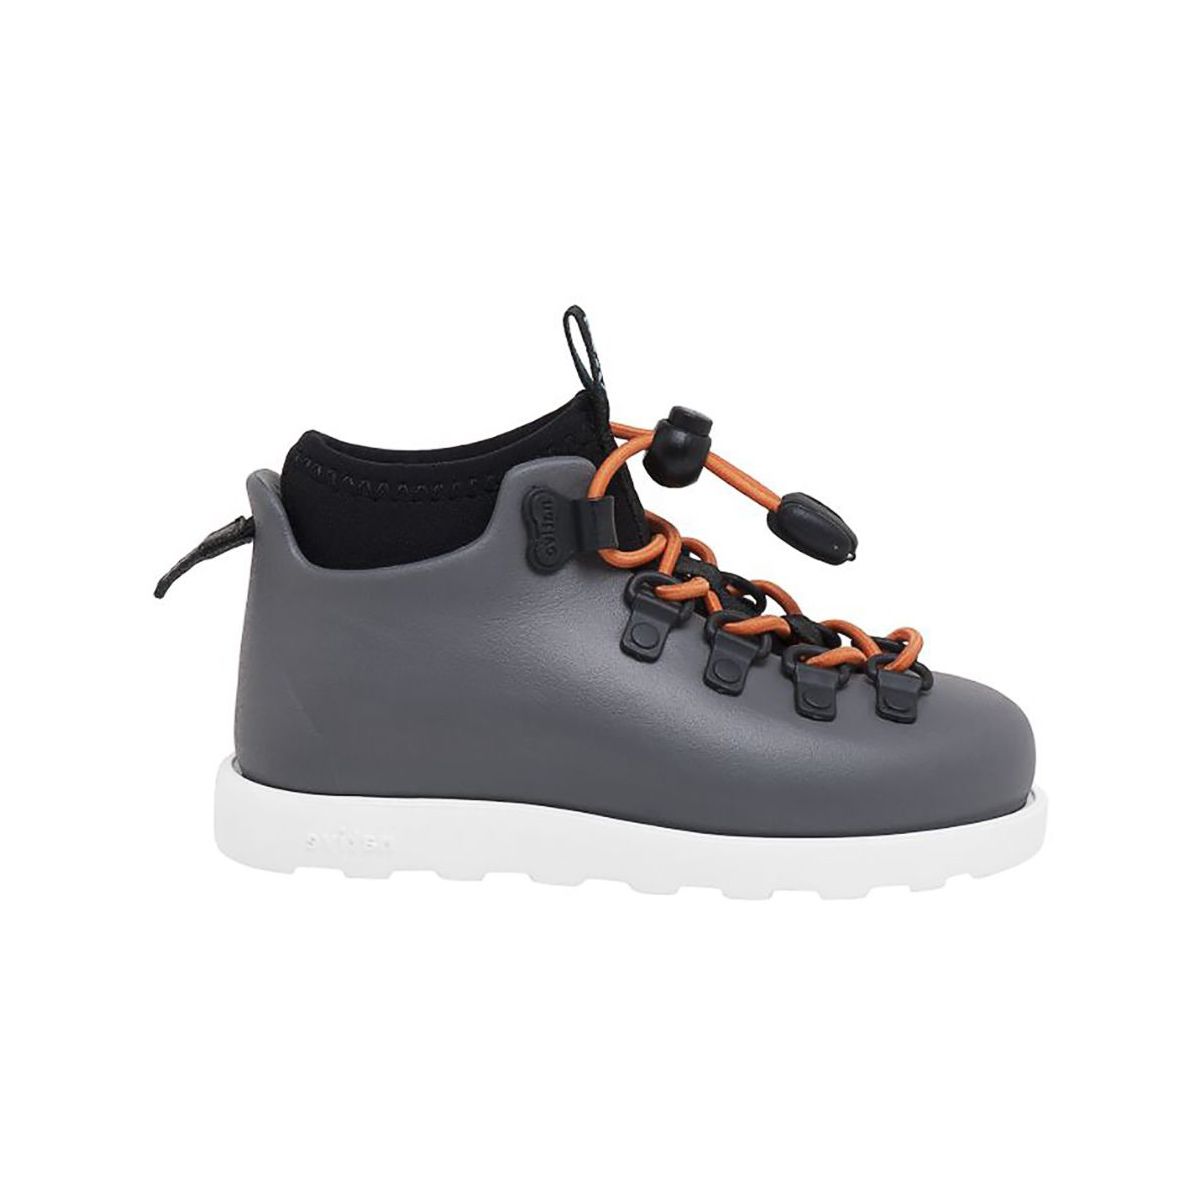 Native Shoes Fitzsimmons Boot - Boys' - Kids